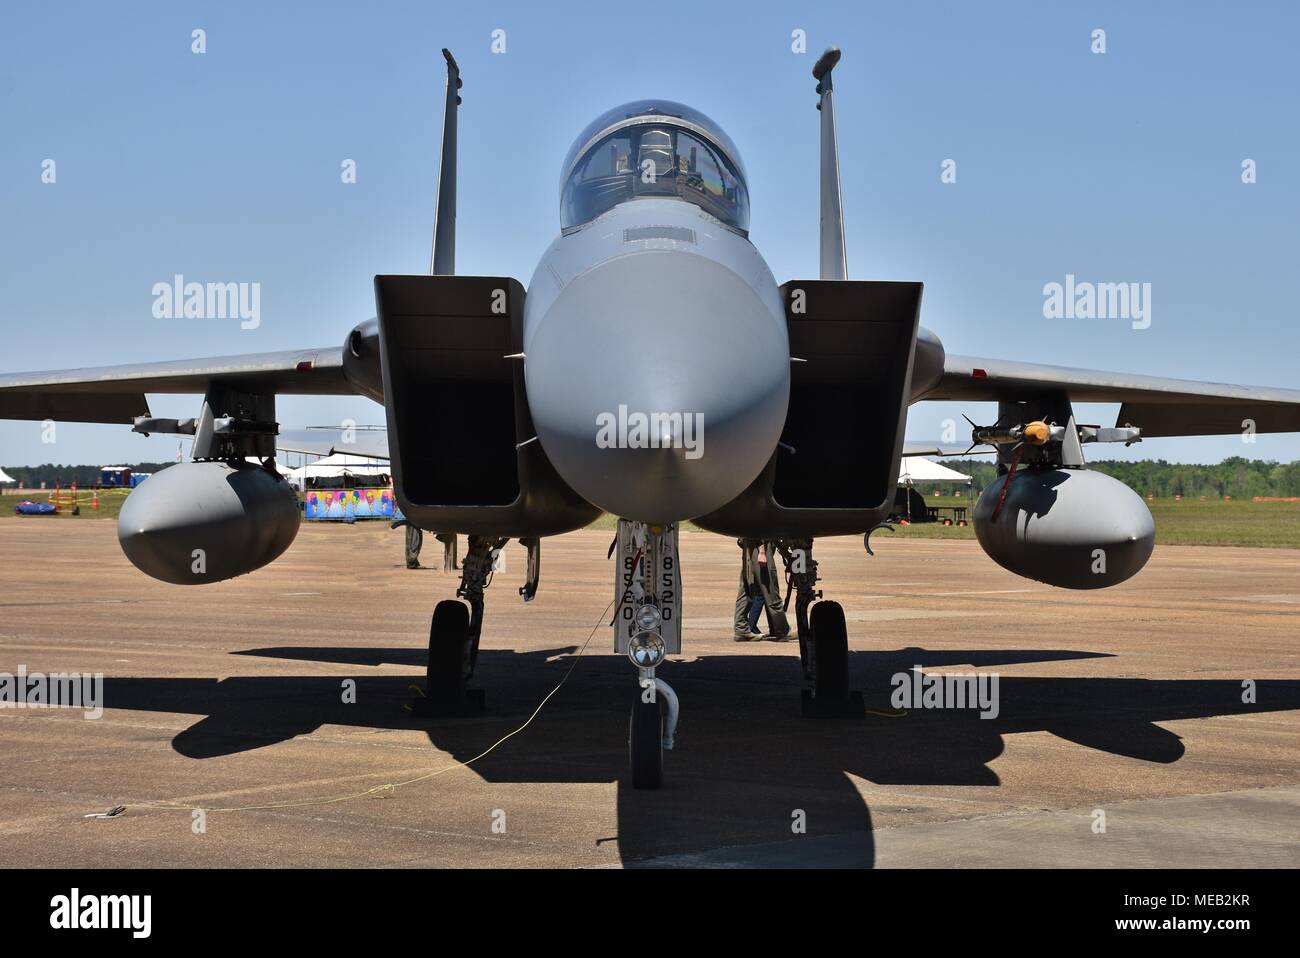 An Air Force F-15 Eagle fighter jet on a runway at Columbus Air Force Base. This F-15 belongs to the Louisiana Air National Guard's 59th Fighter Wing. Stock Photo